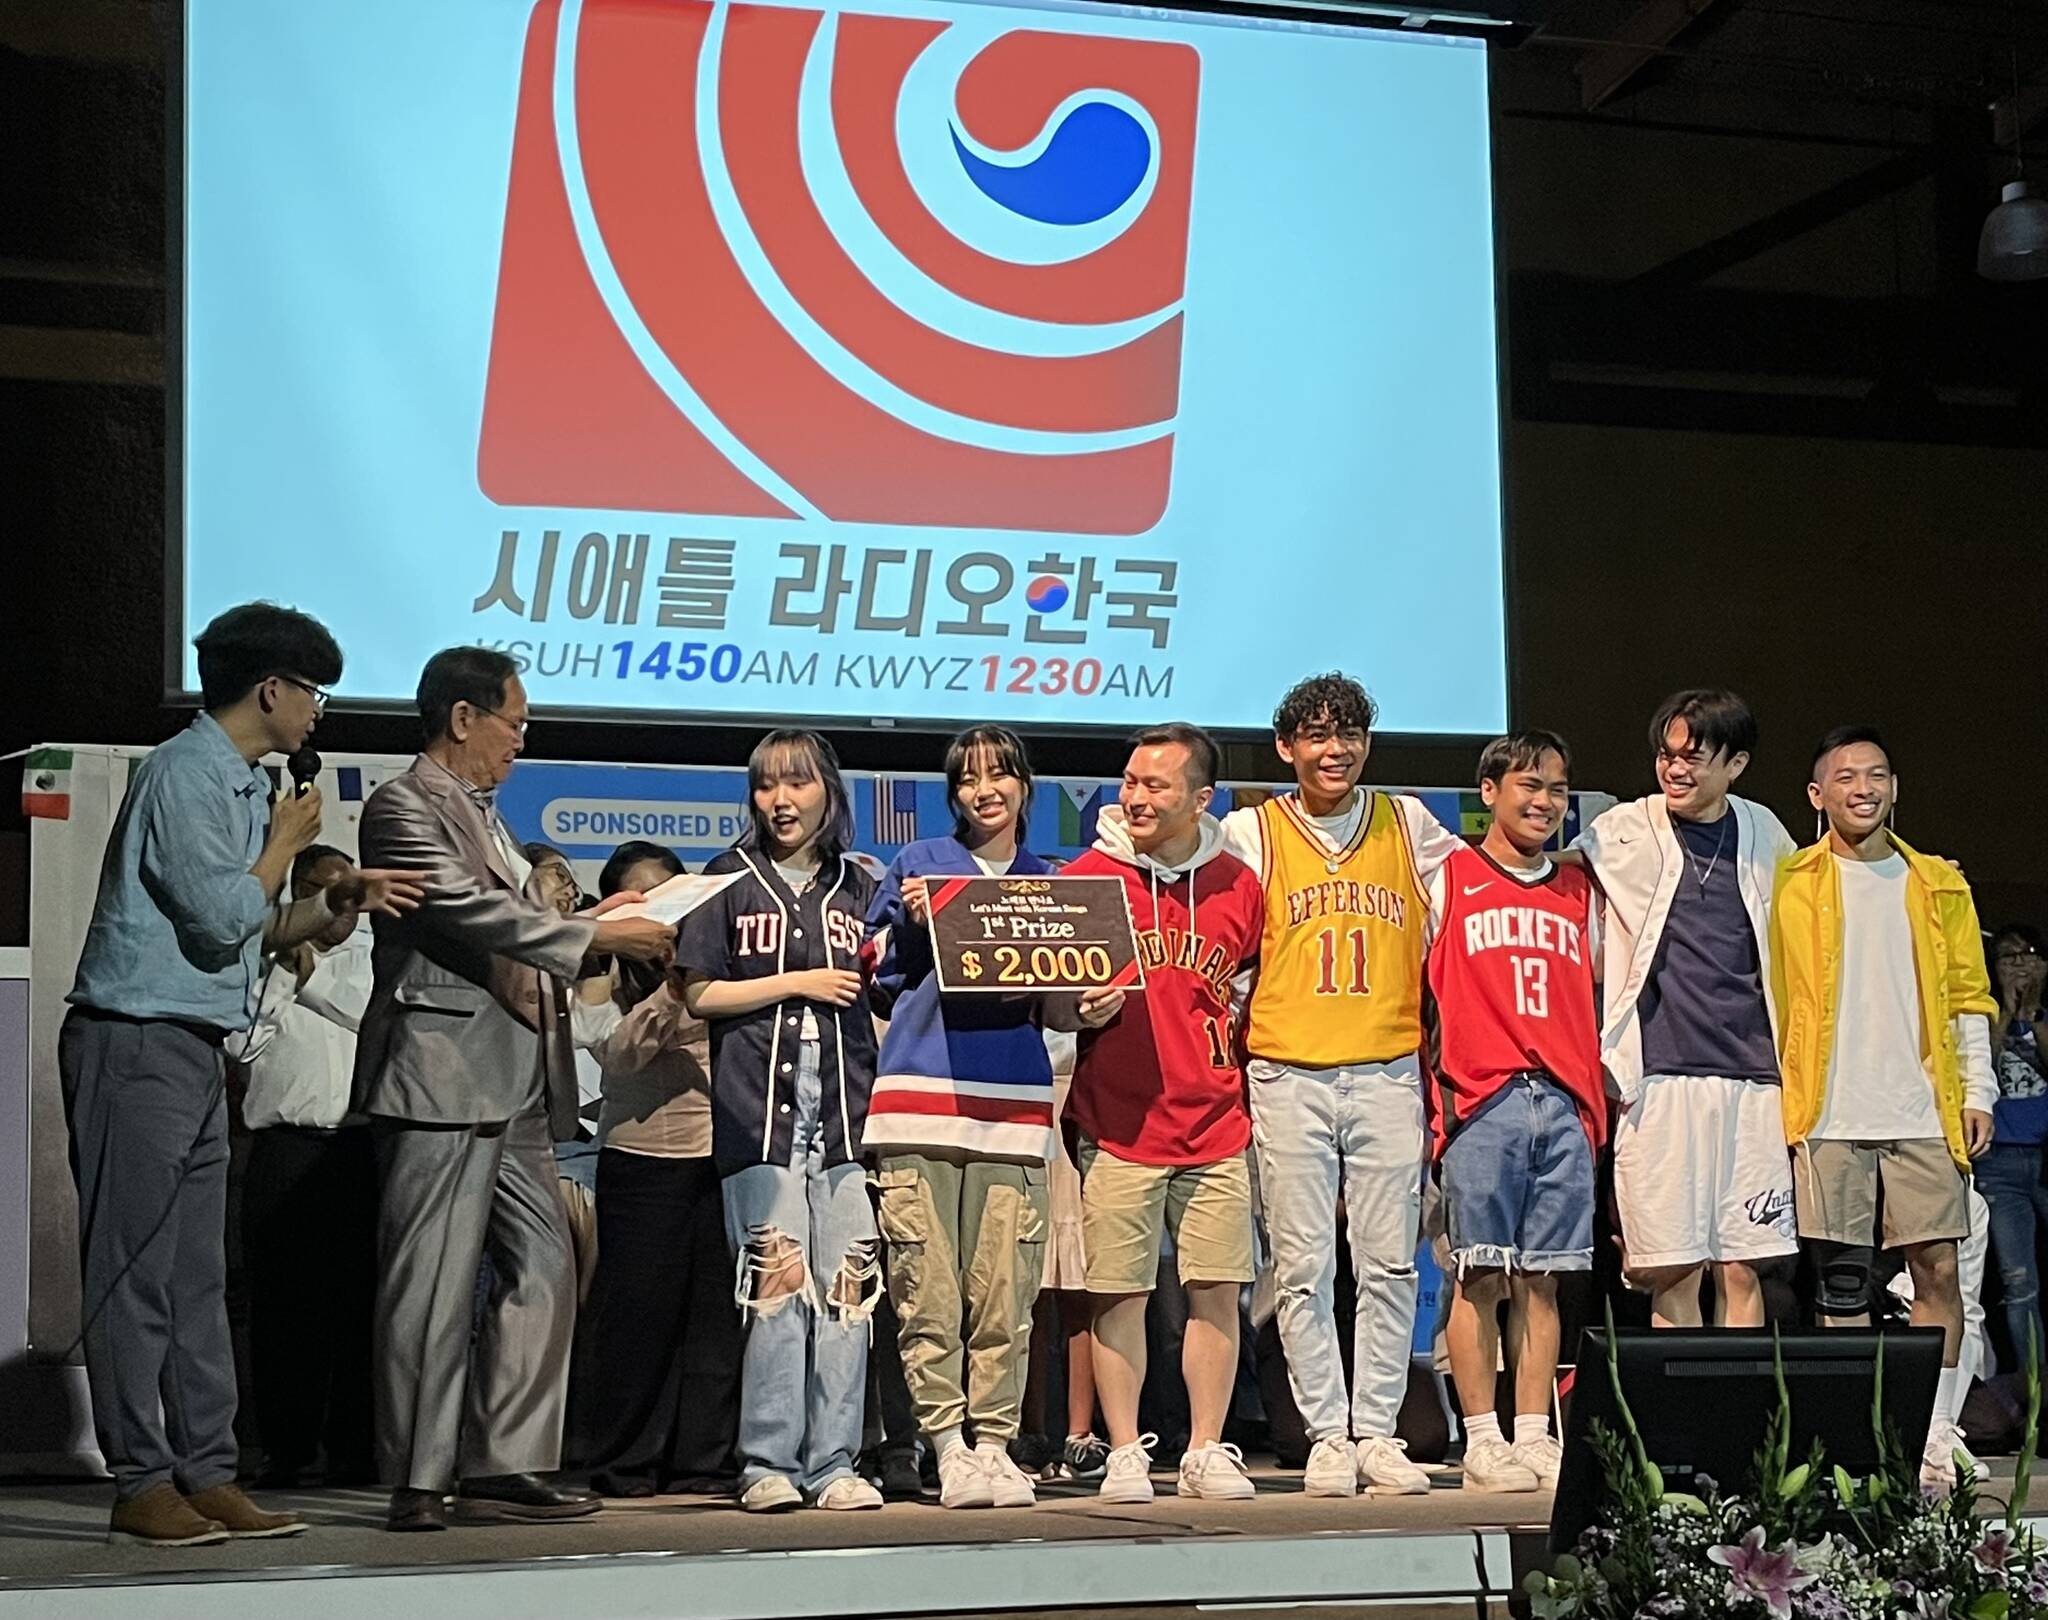 The group Kosmix was the winning performer at the “Let’s Meet with Korean Songs” event held Aug. 13 at Federal Way New Church. Radio Hankook hosted the contest, which featured an array of songs, dances and more that celebrated Korean culture. (Photo by Andy Hobbs/Federal Way Mirror)